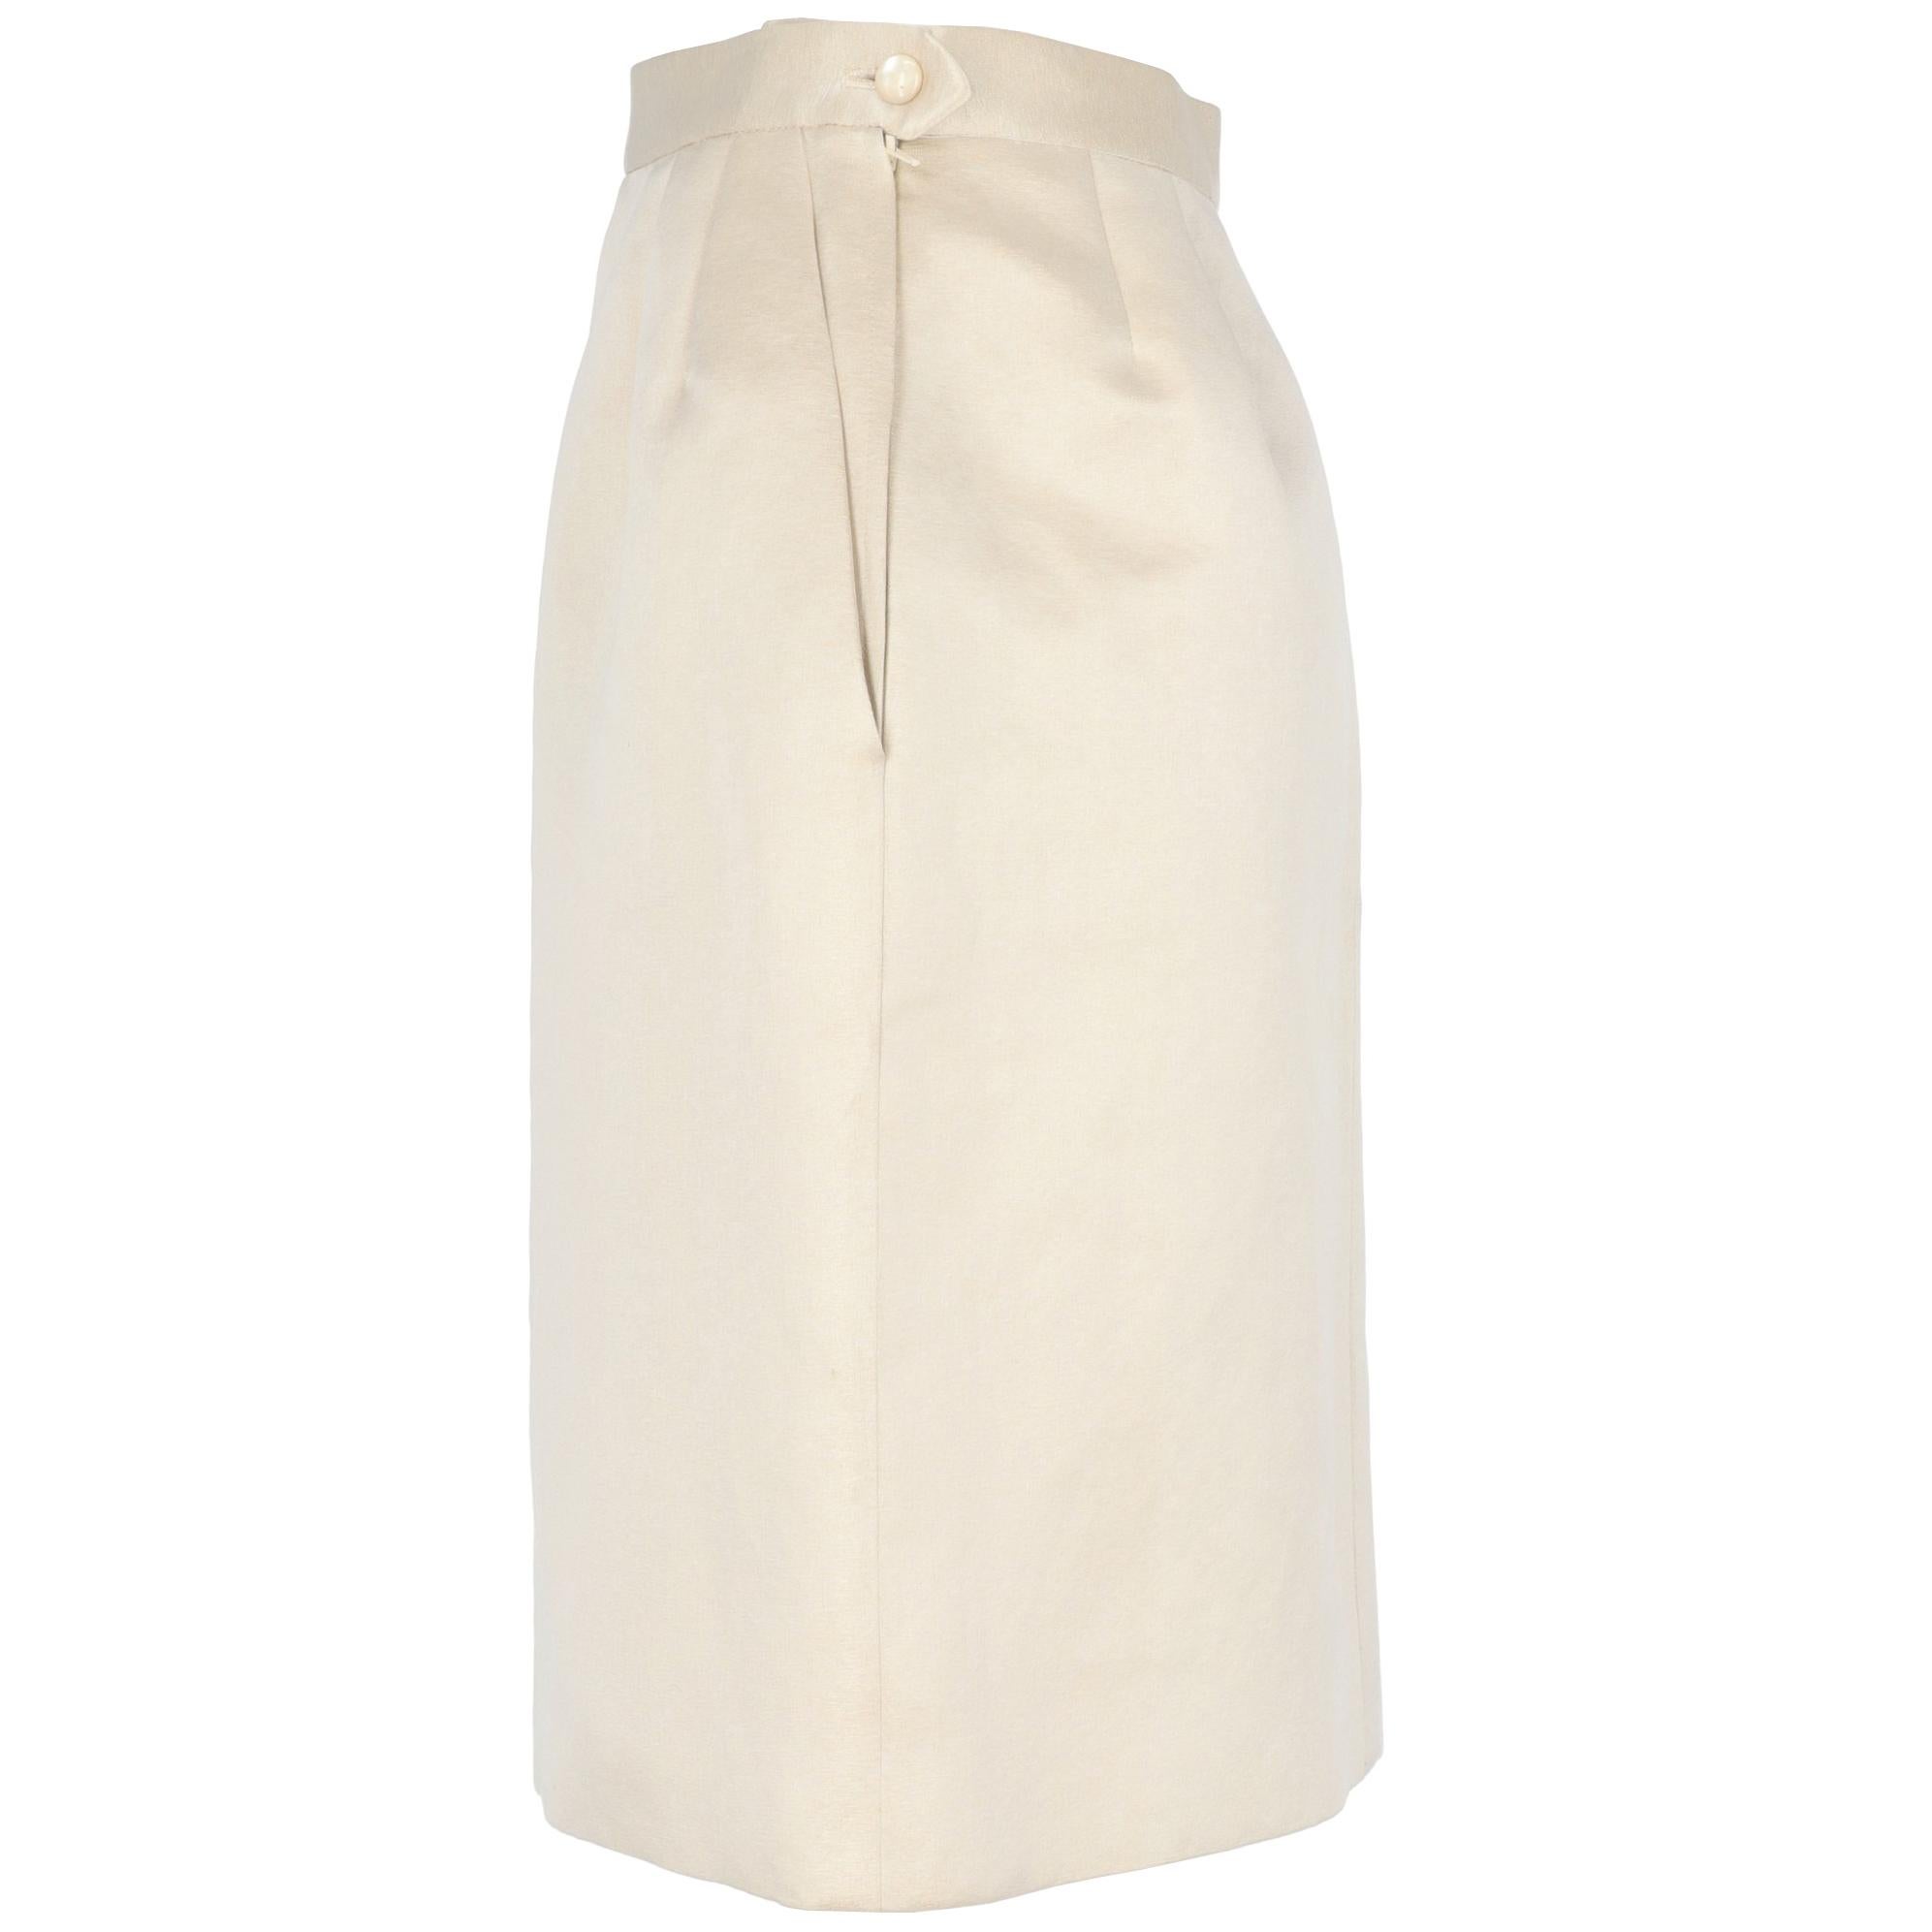 Yves Saint Laurent ivory silk knee-length skirt with golden weft thread. Amphora model and double waist pinces. Side closure with mother-of-pearl button and zip, side welt pockets and double pinces on the back. Acetate lining.

The item shows small